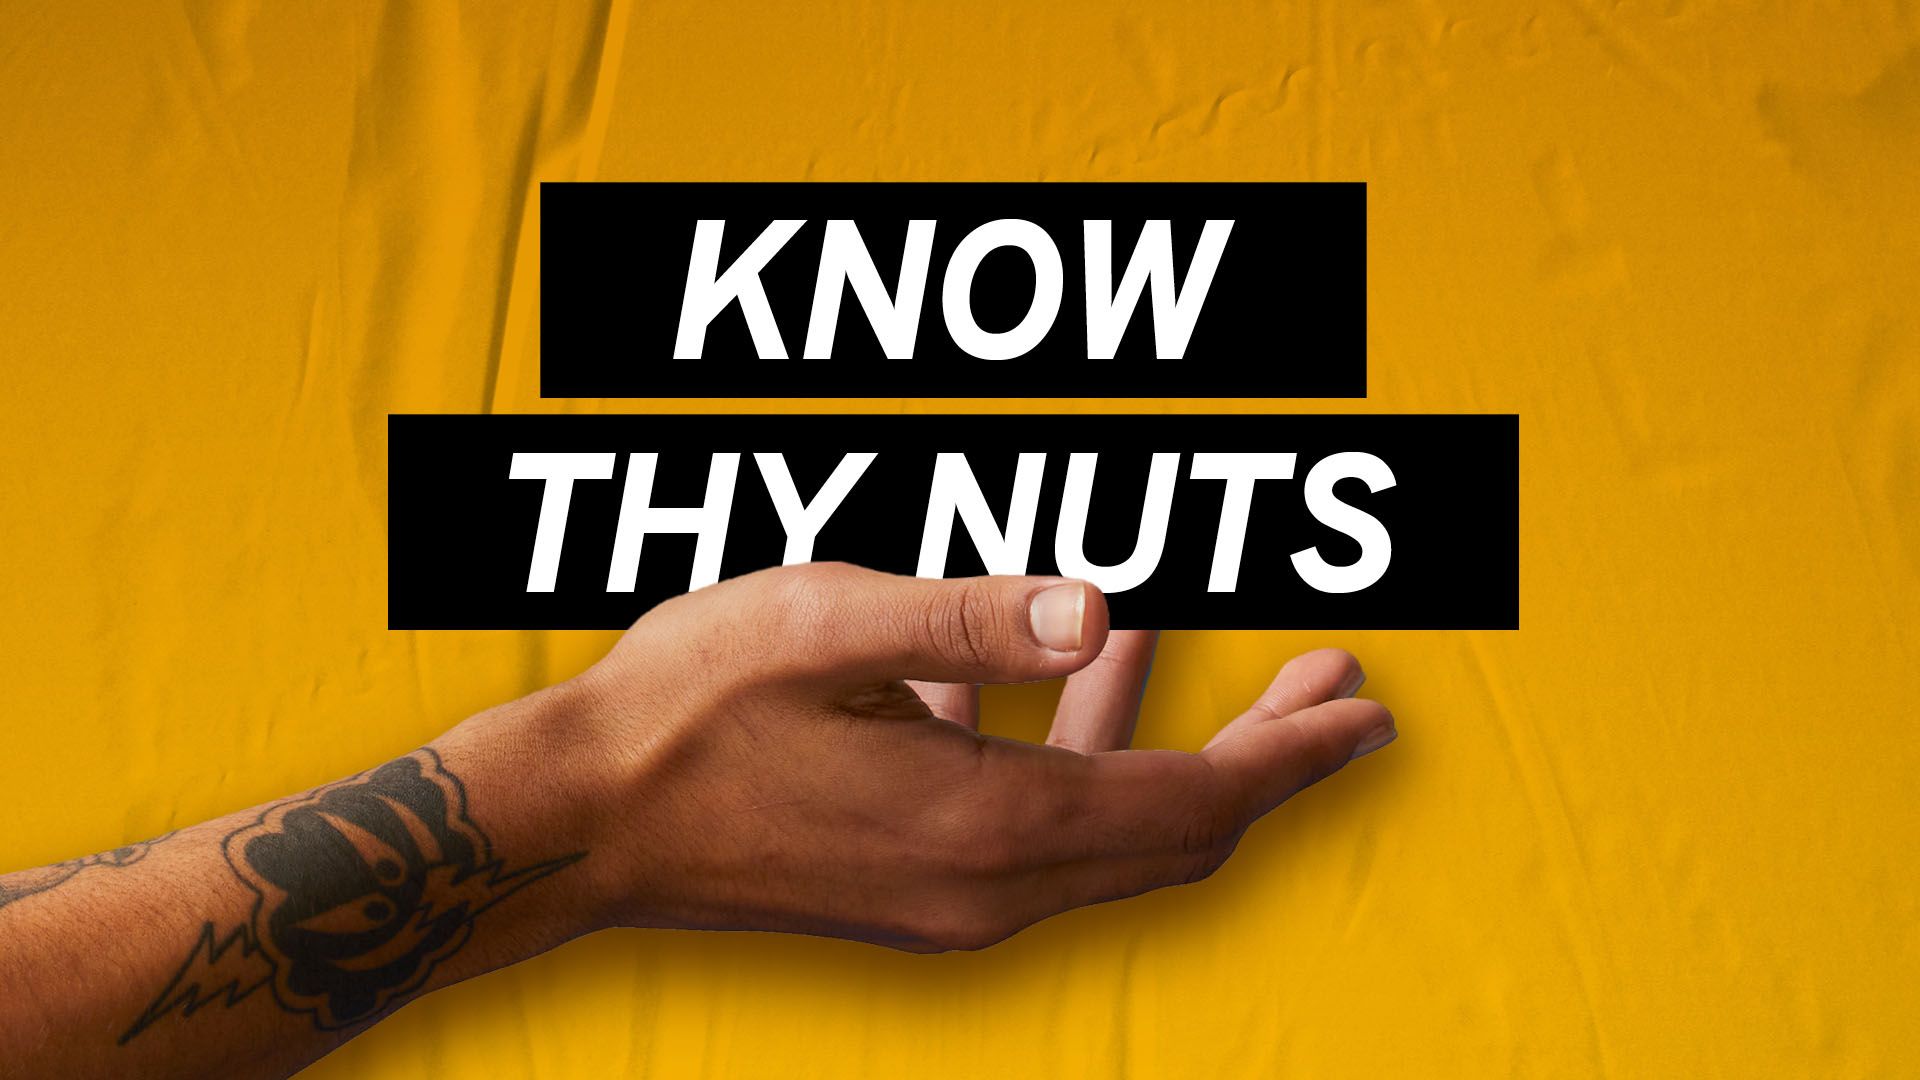 Graphic image of a man's hand over a yellow background. Surmounting the hand is a boldly printed sign that says: "KNOW THY NUTS"